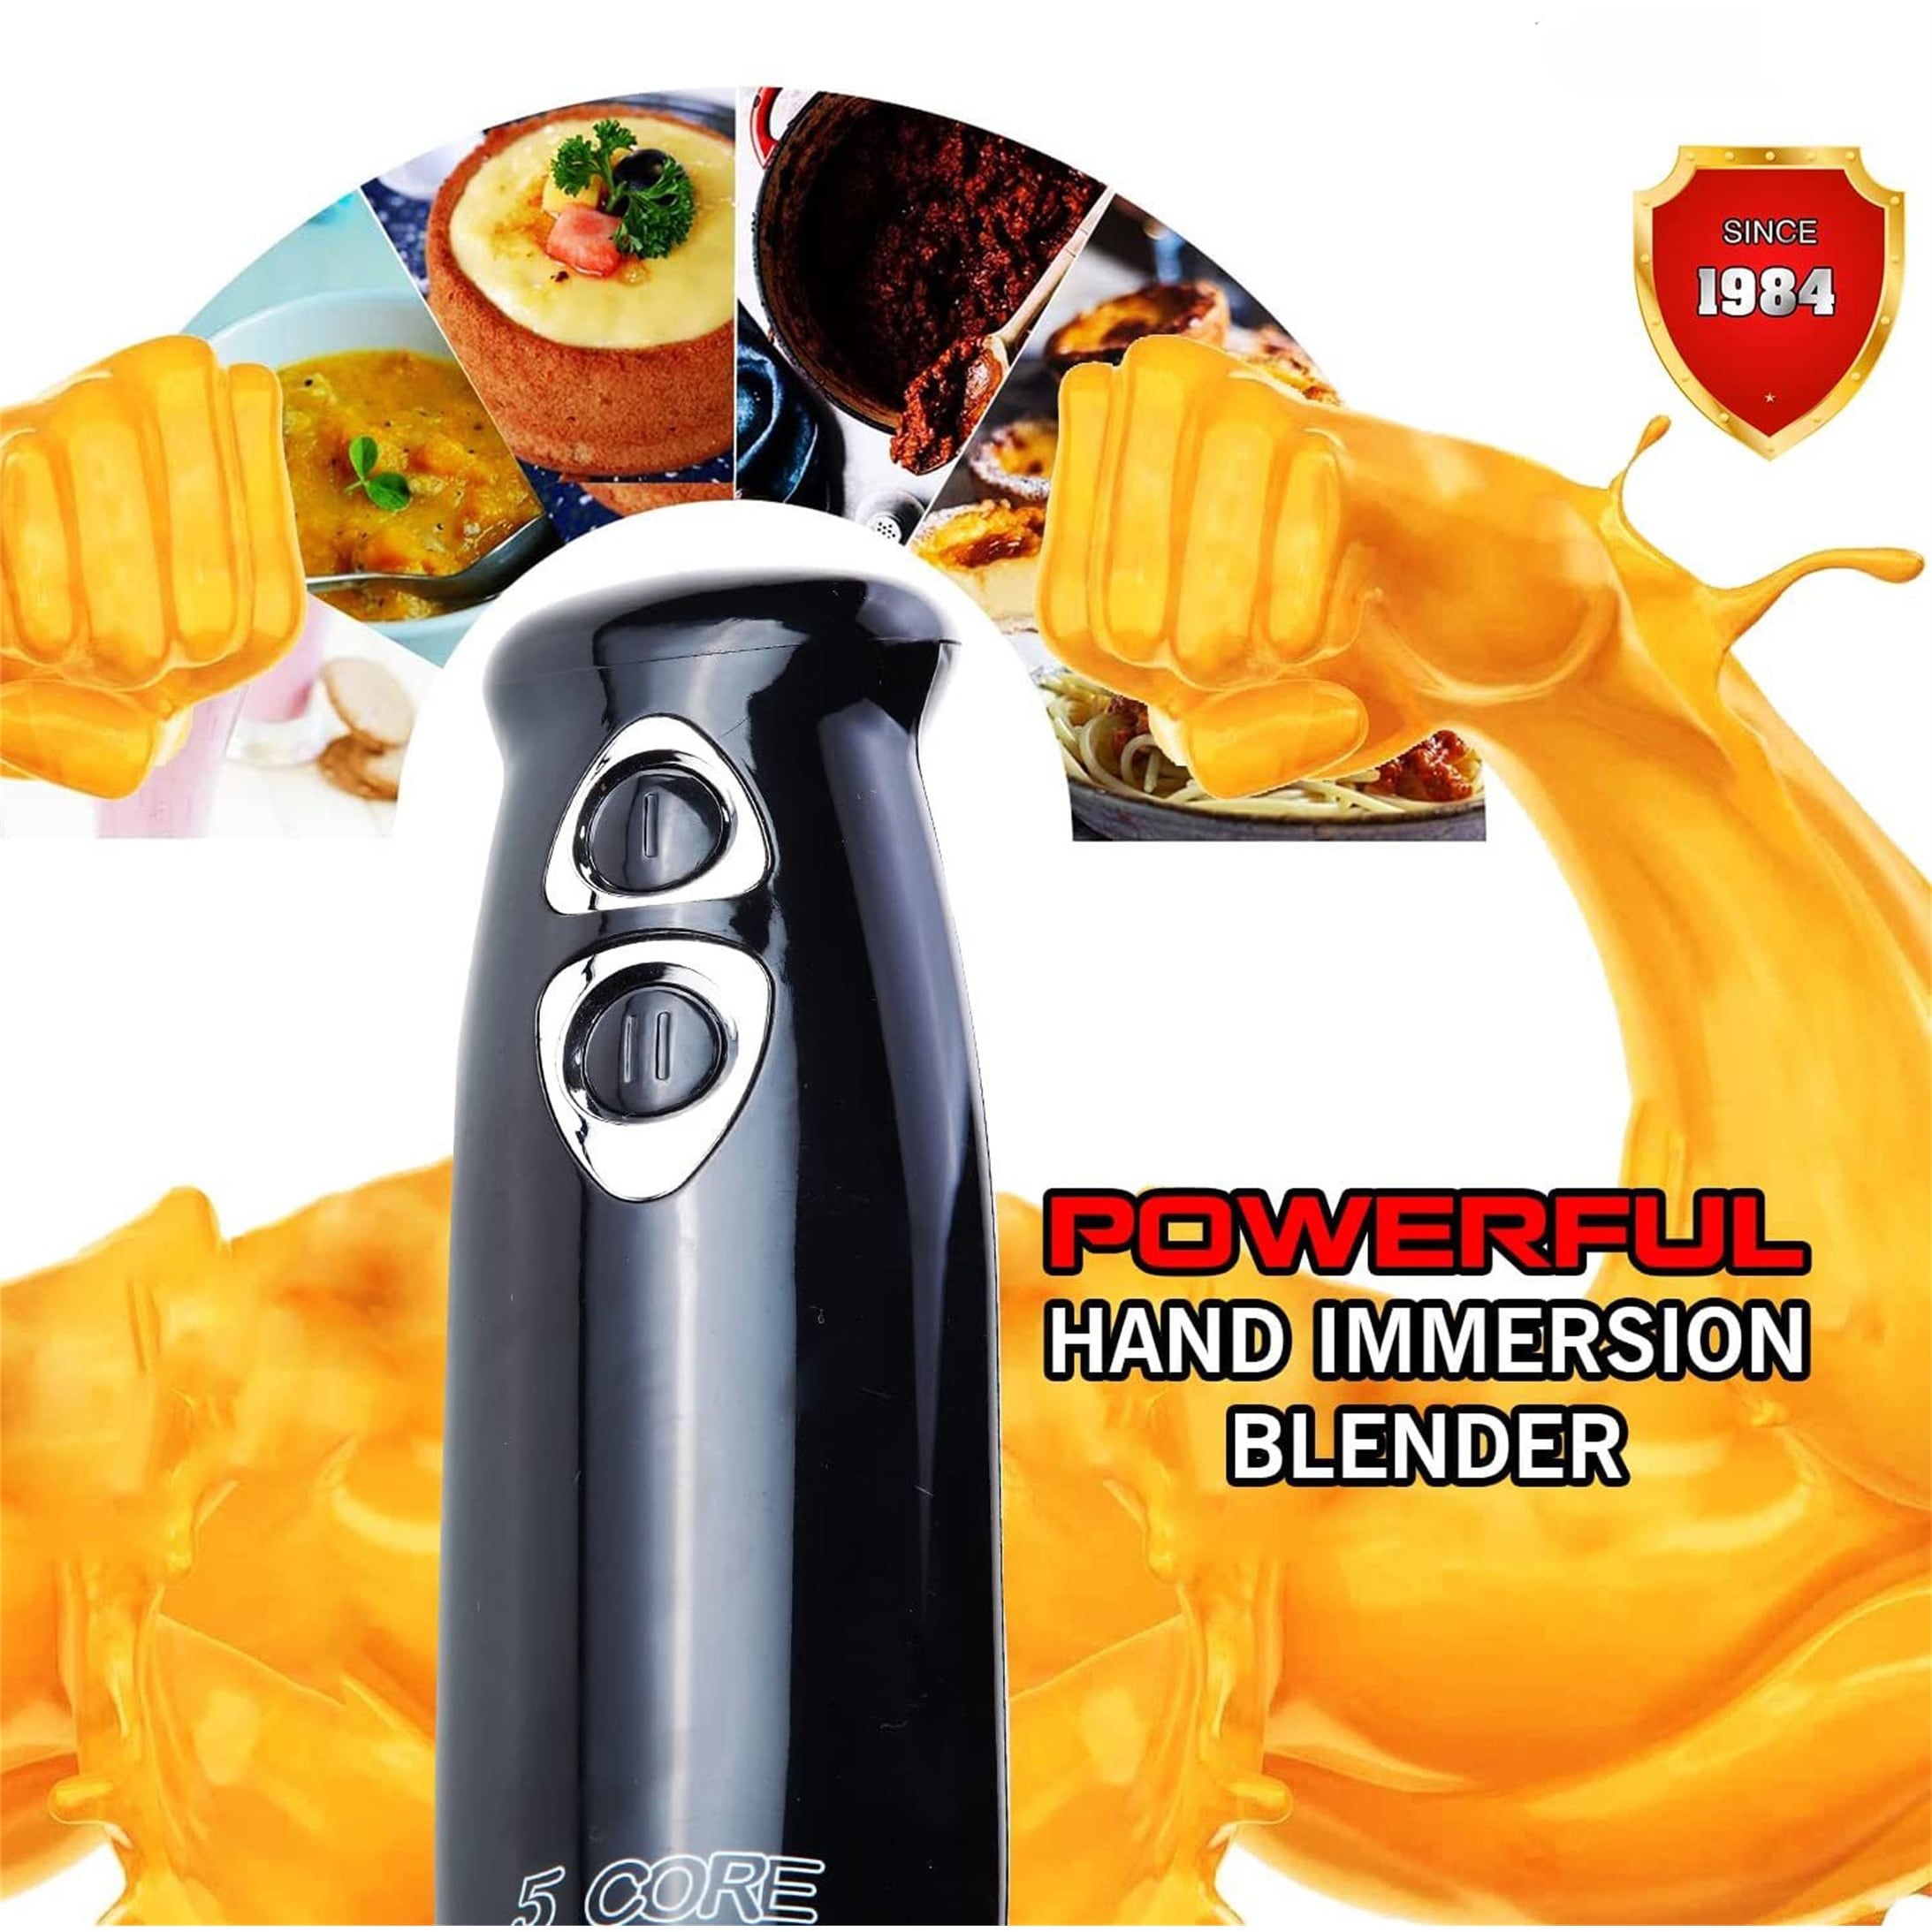 https://ak1.ostkcdn.com/images/products/is/images/direct/4a24edcdbb3ac9a15927c84d8e0e3096ca8d30eb/Hand-Immersion-Blender-Handheld-Electric-Blenders-Emersion-Hand-Mixer.jpg